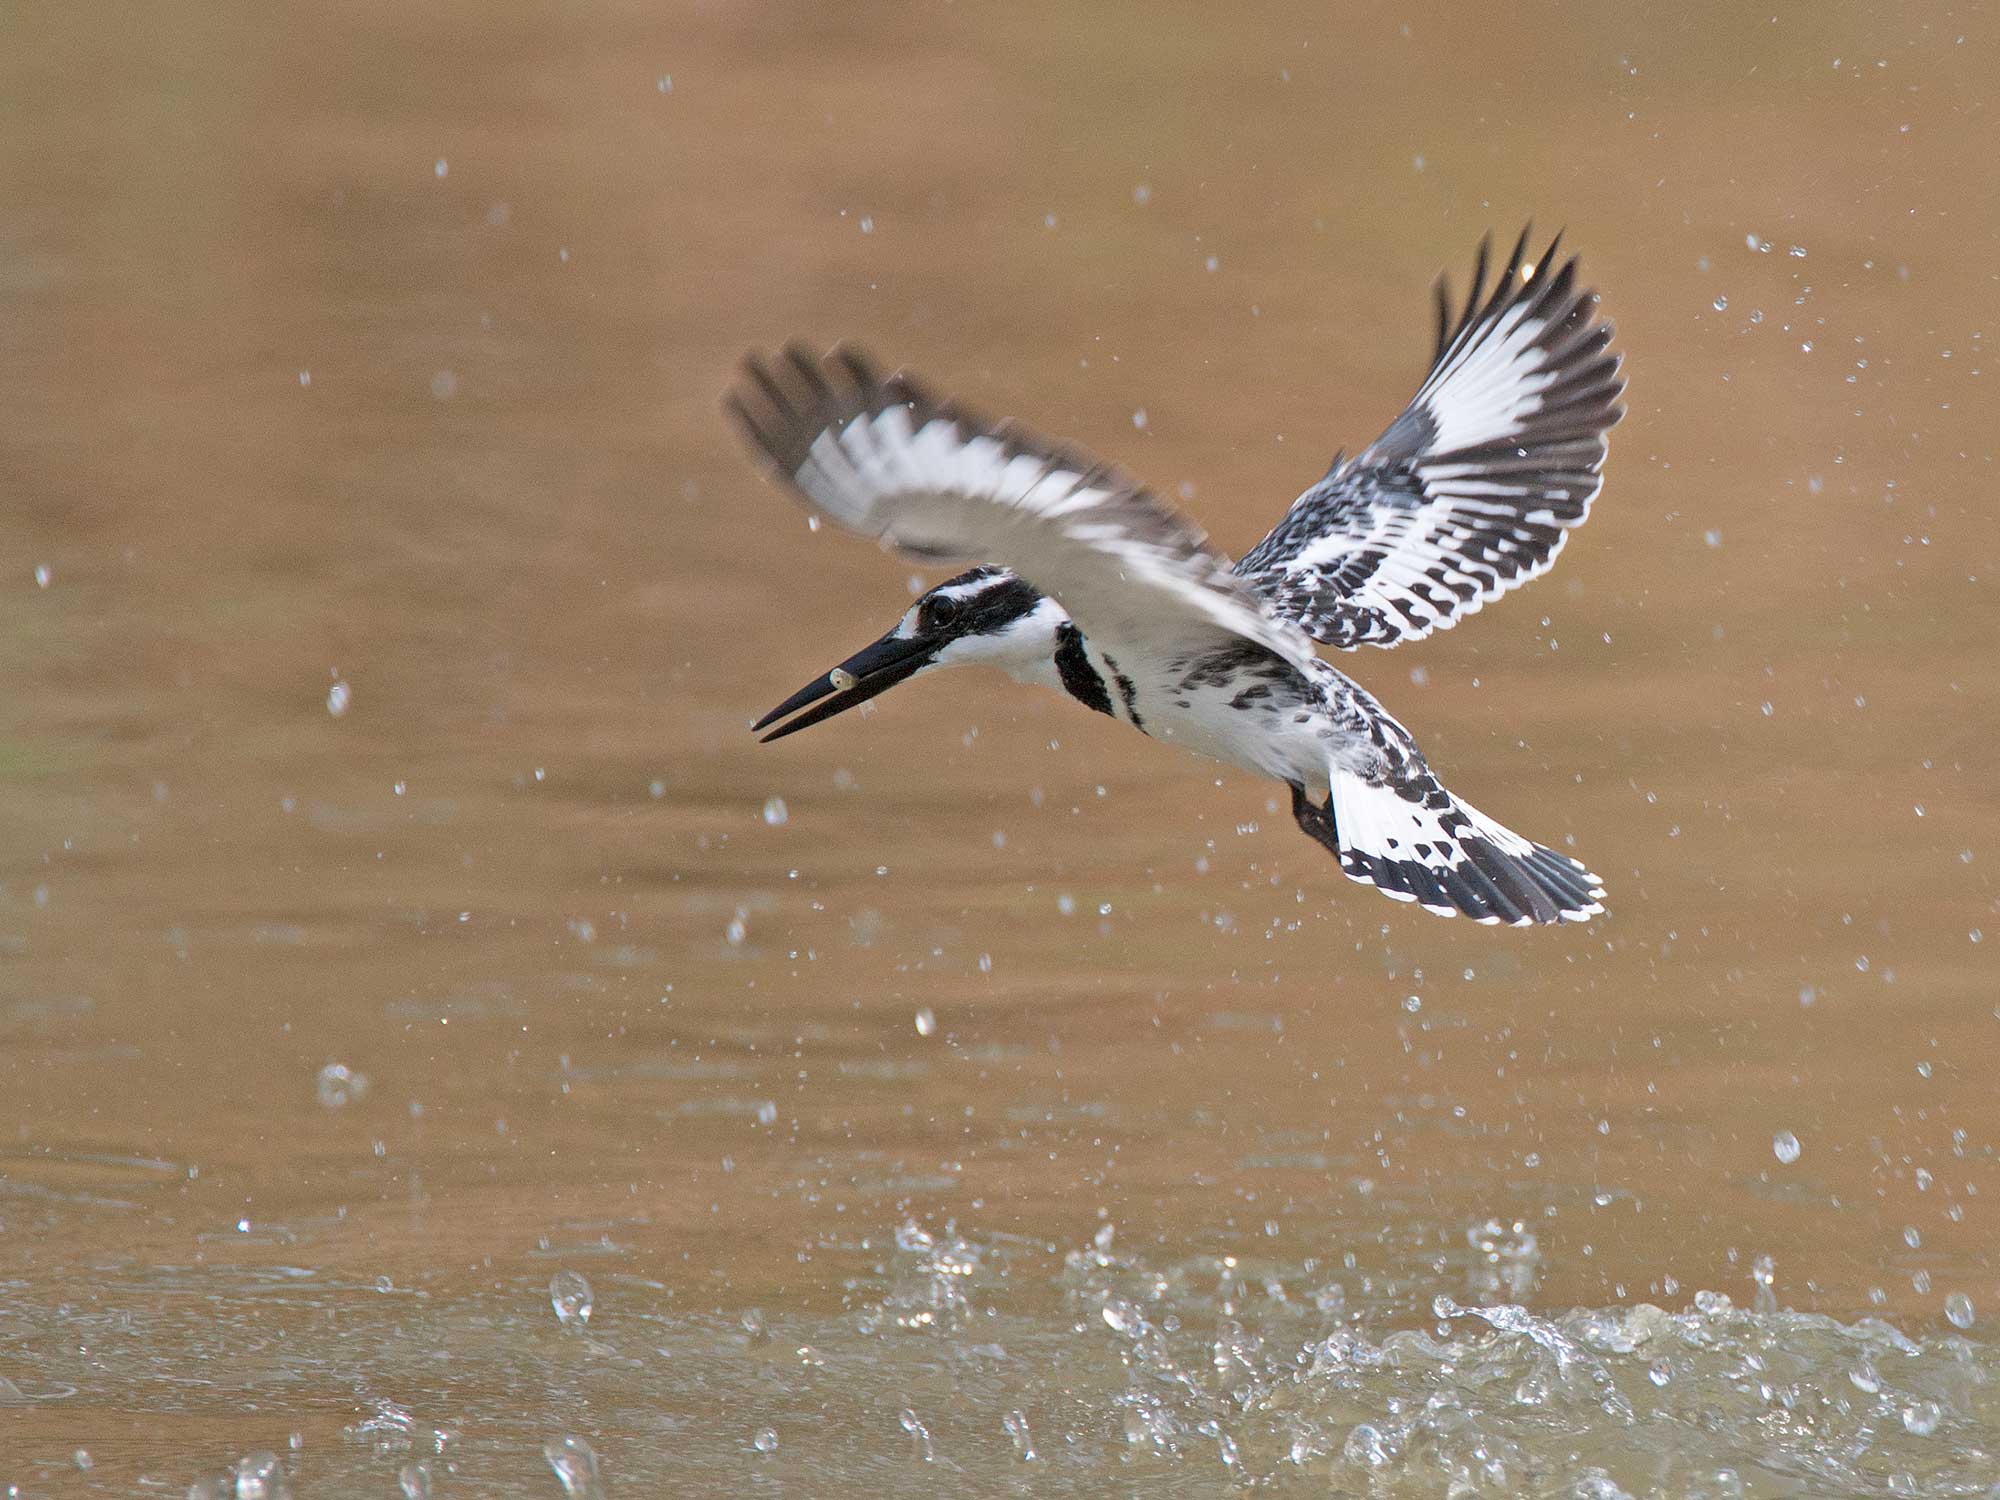 A pied kingfisher in flight emerging from the water with a small fish in its beak.